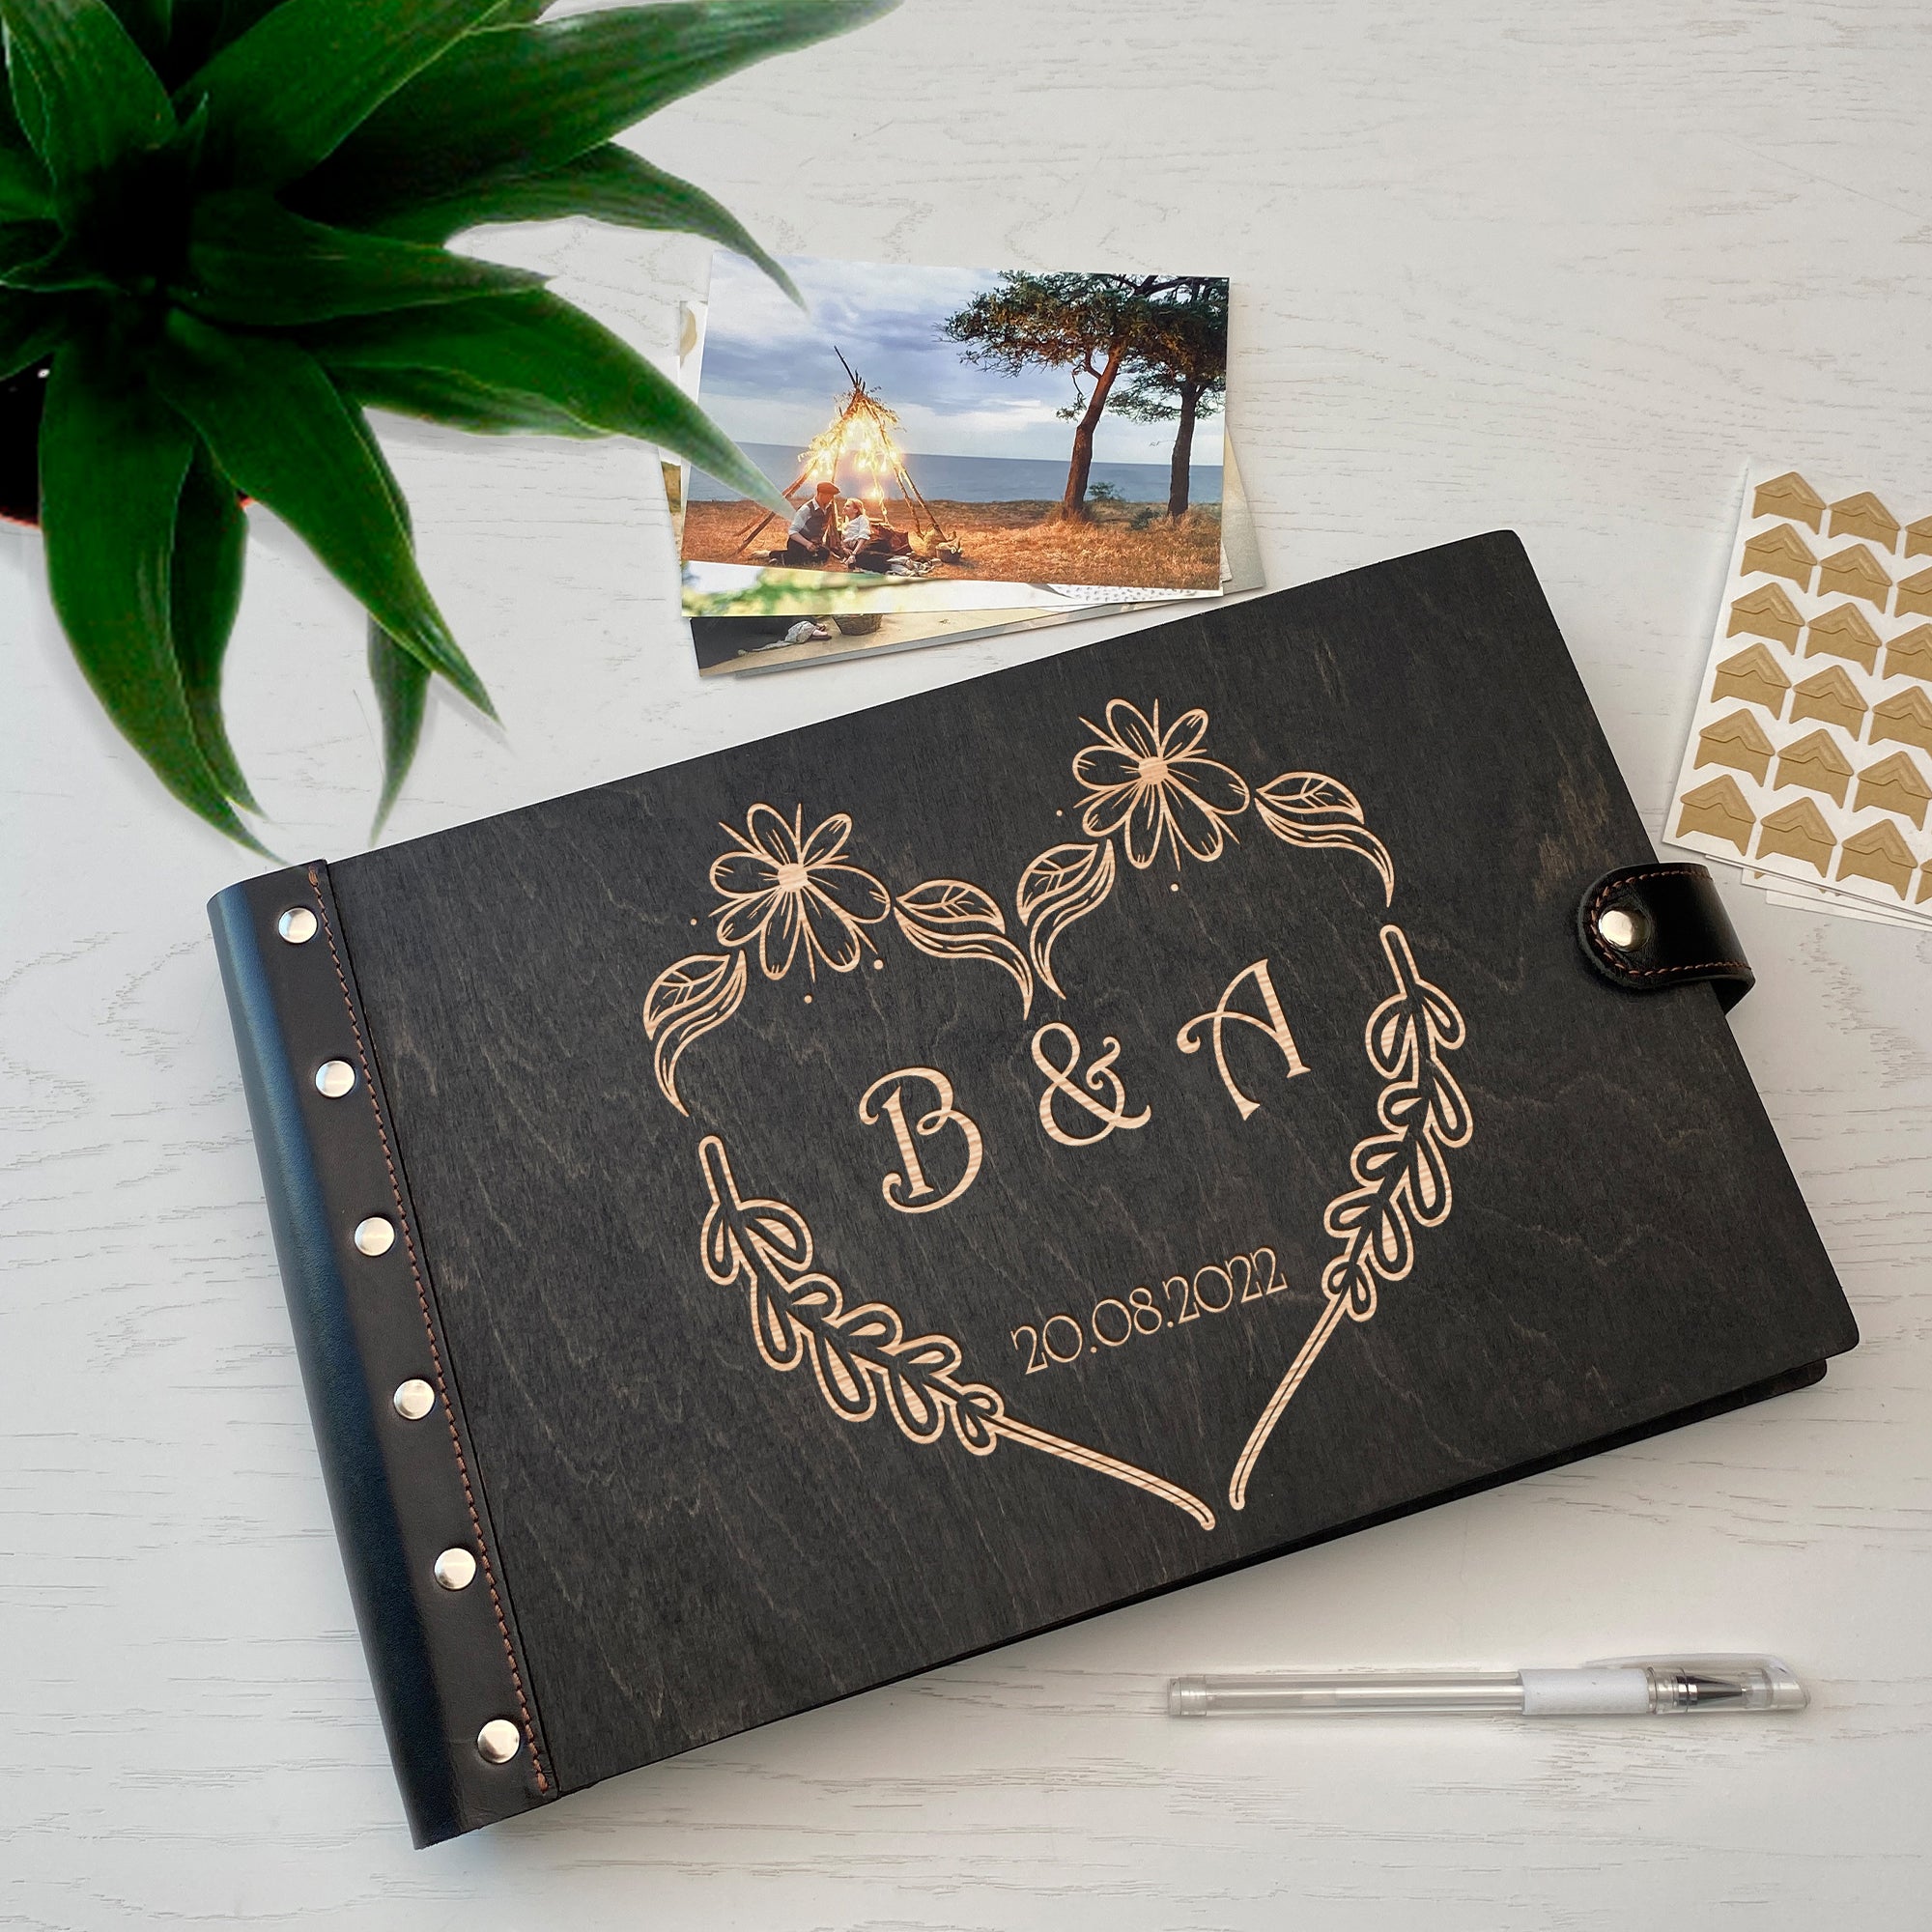 Personalized photo album with leather cover and Wedding initials engraving